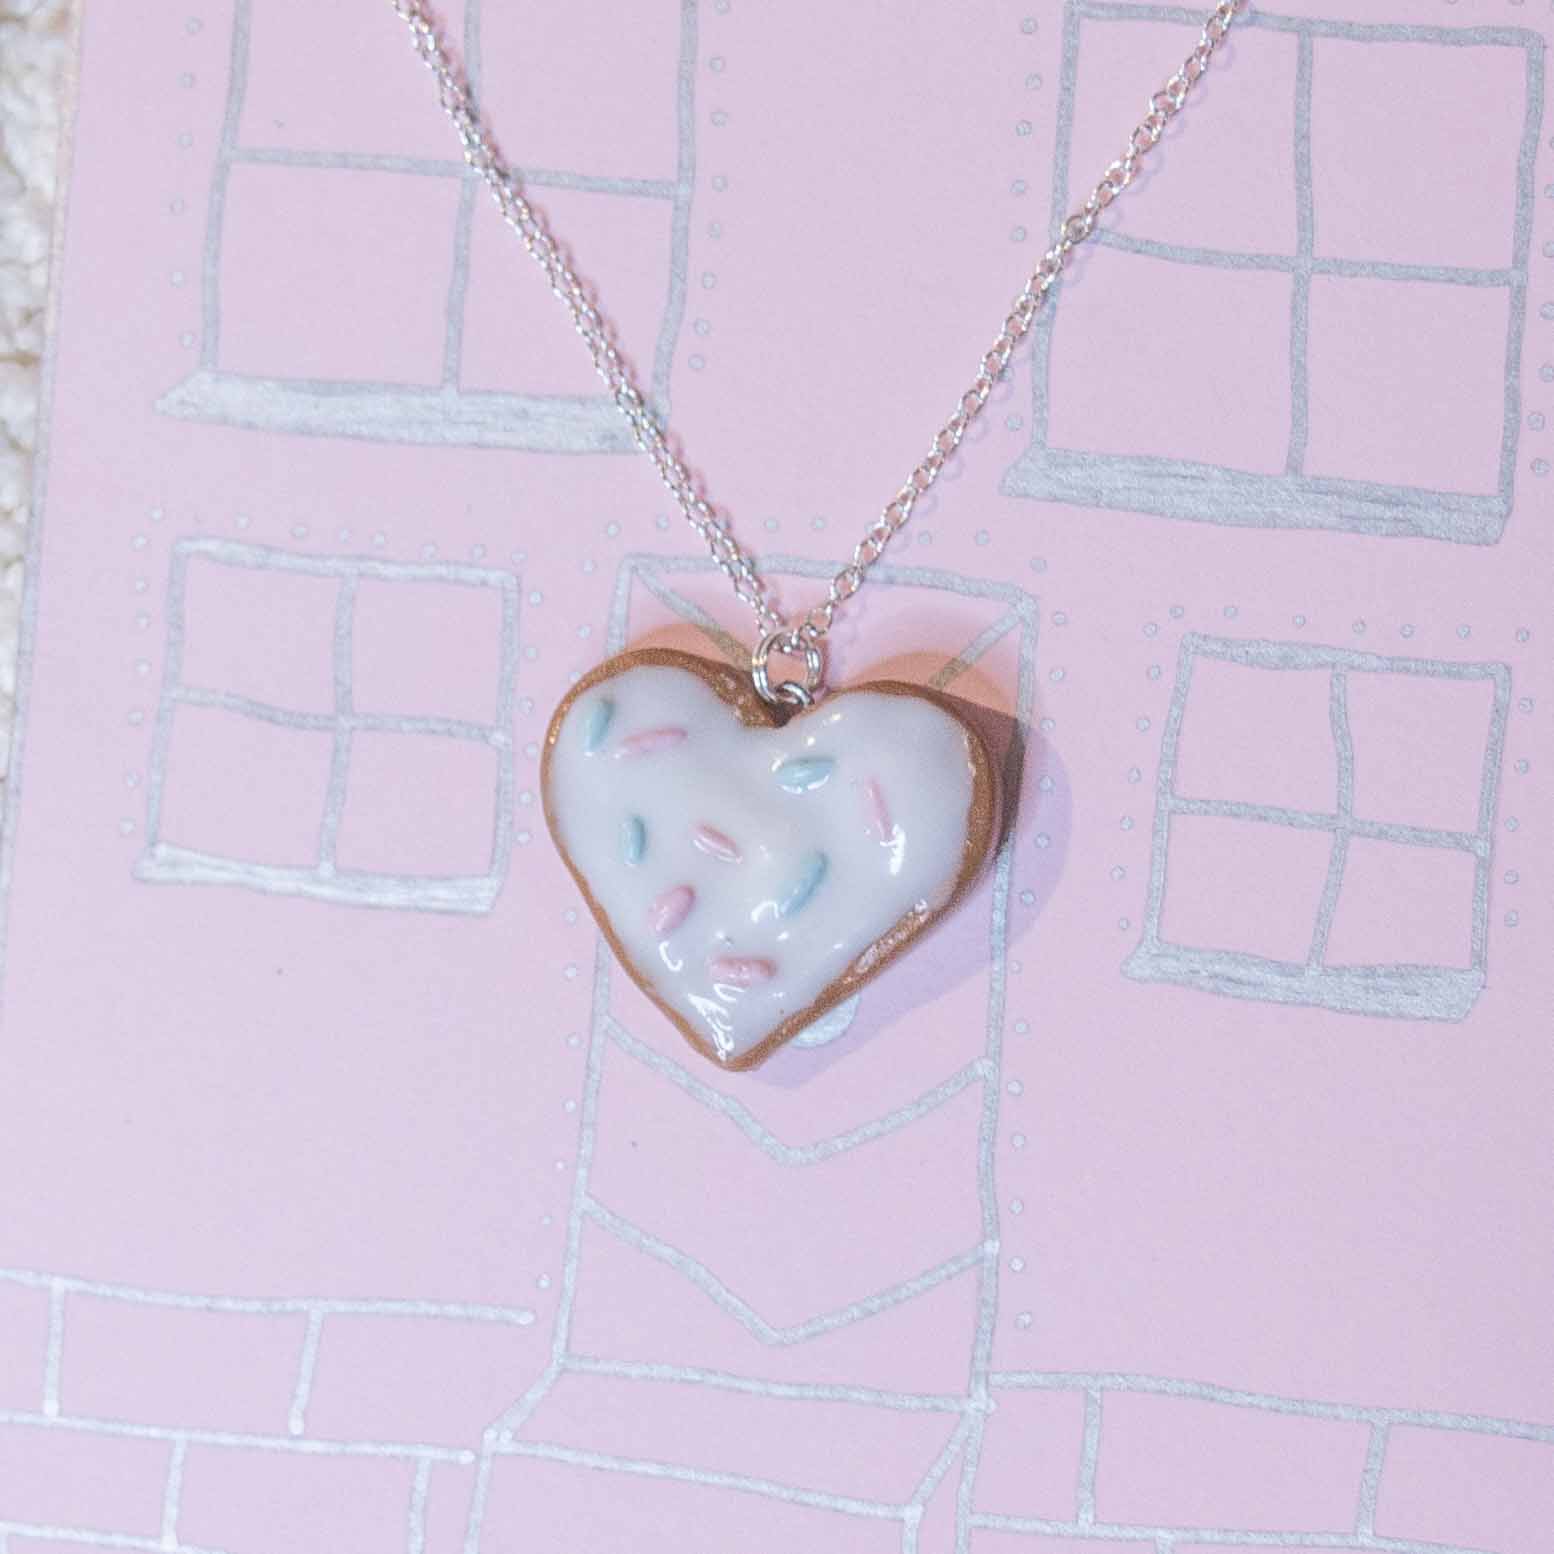 Necklace kawaii heart pink white